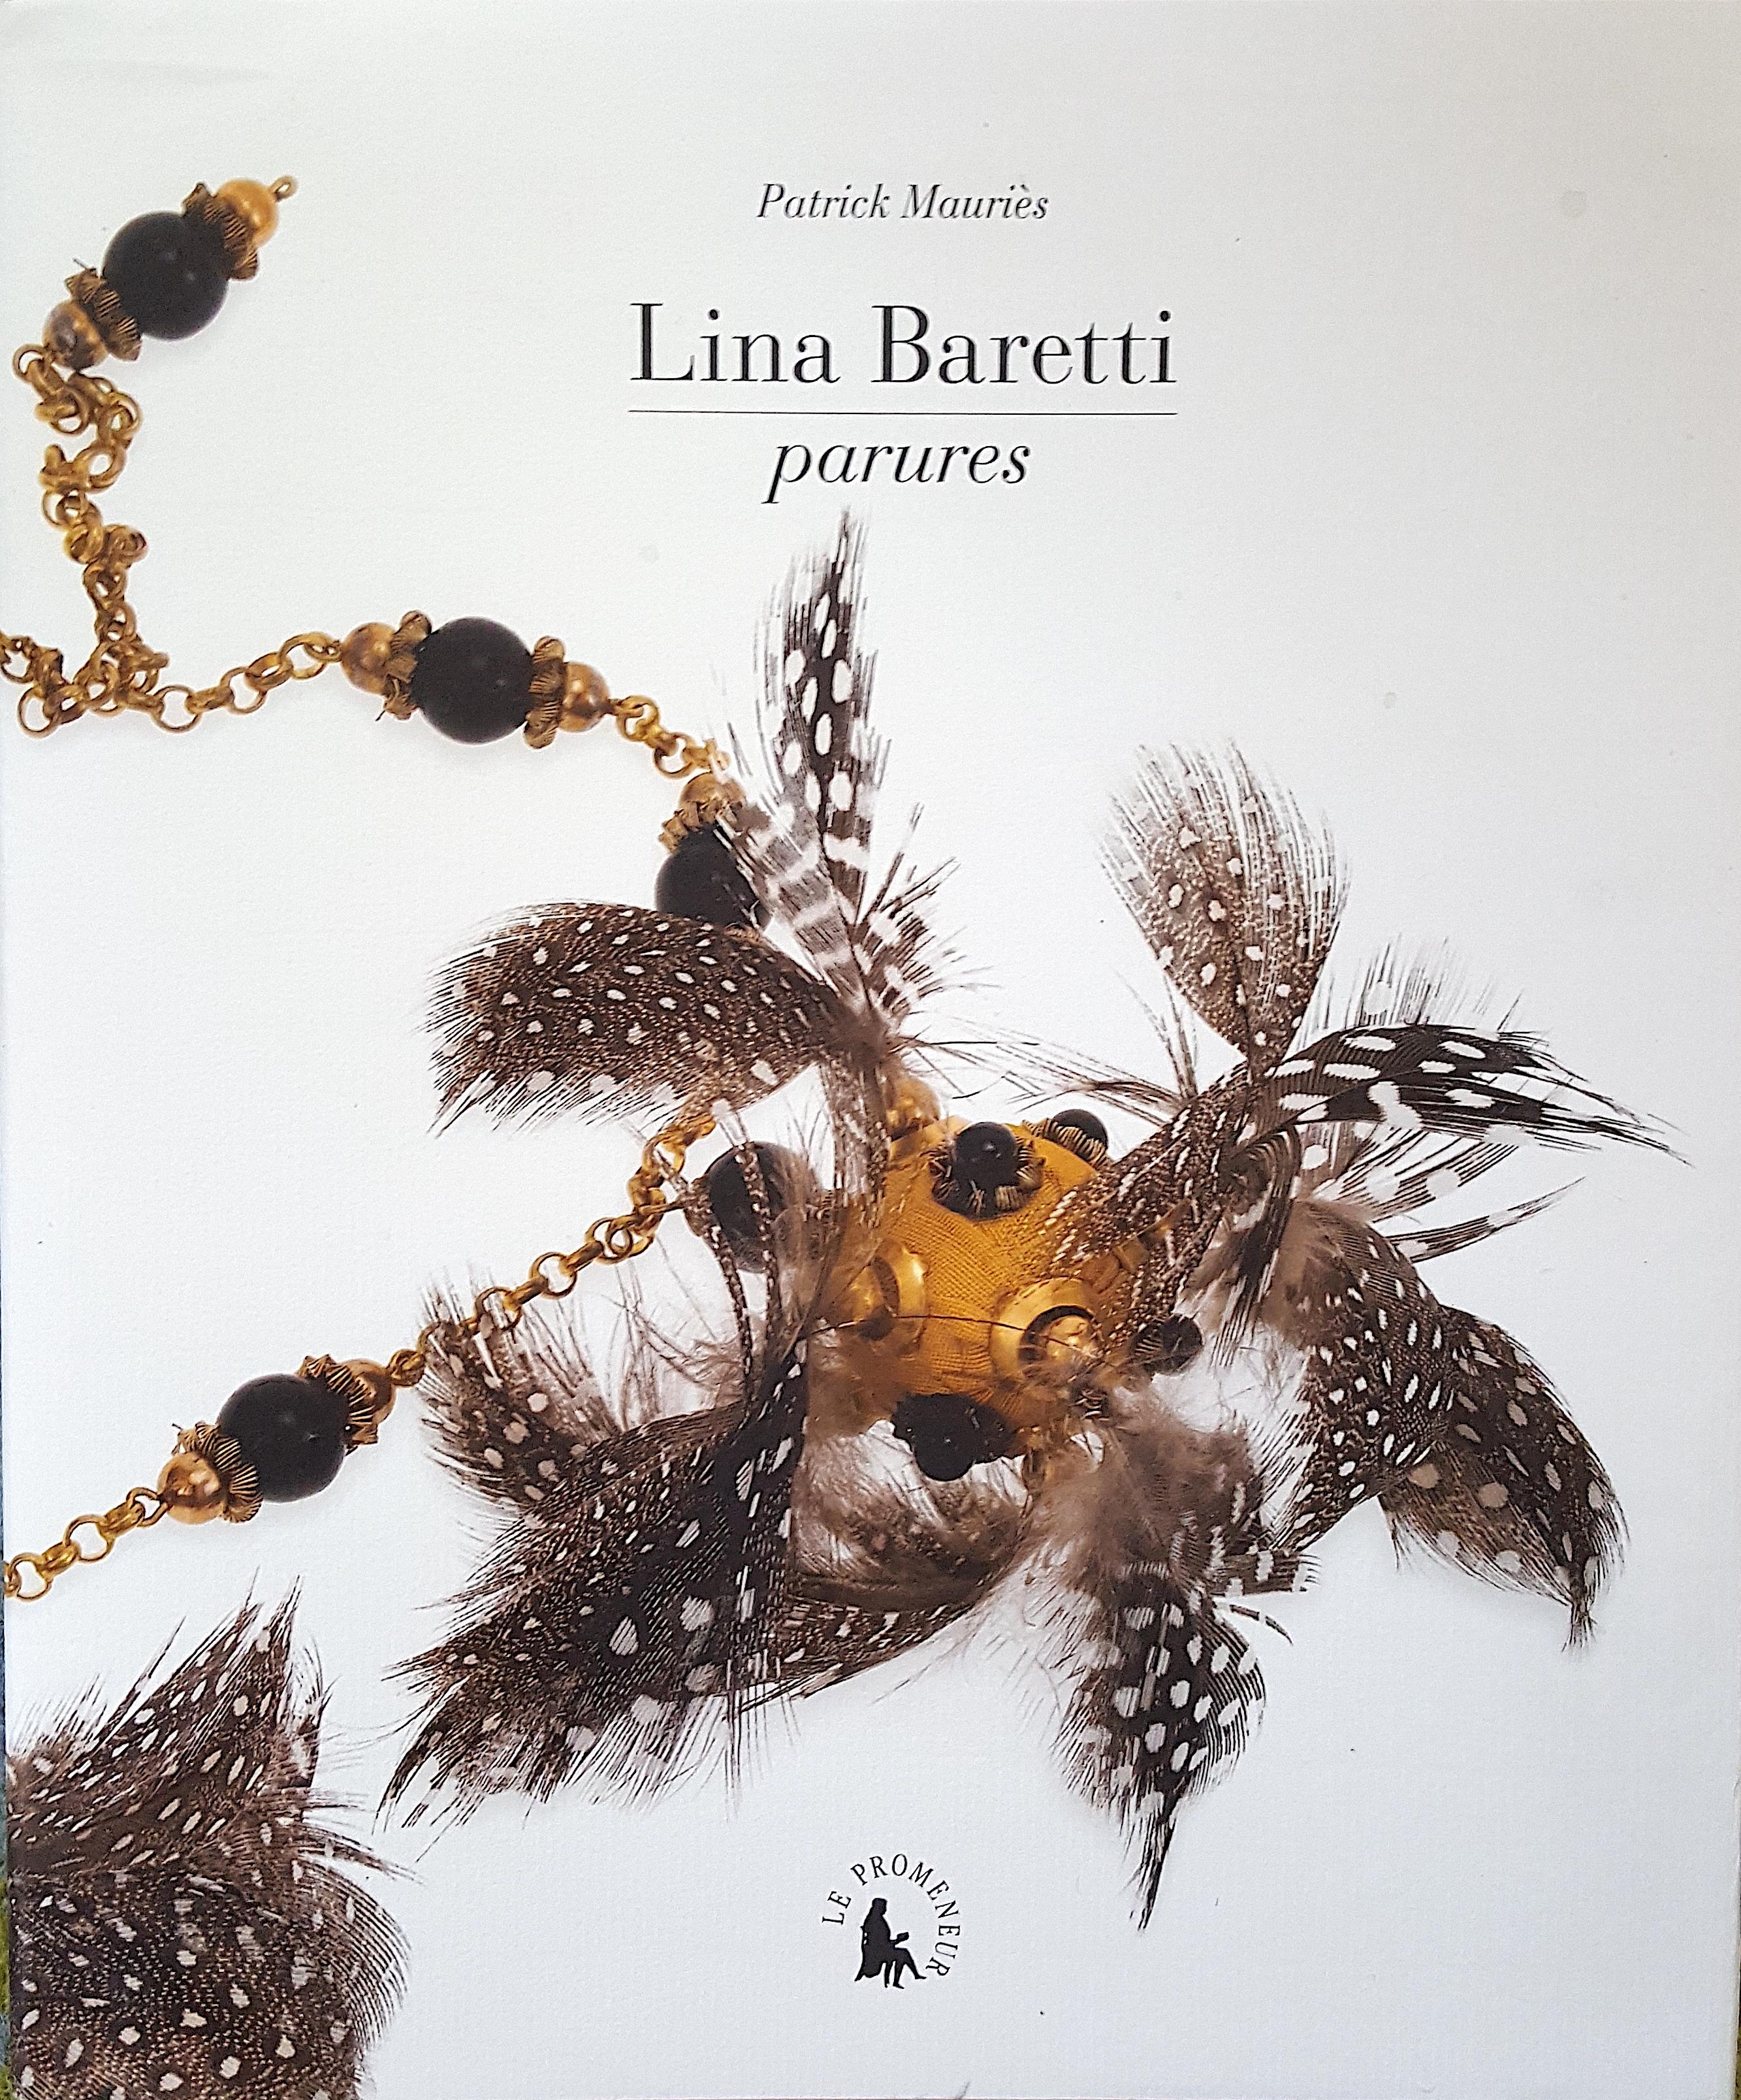 Unusually decorated with small partridge feathers like the yellow-gold gilt necklace commissioned by Elsa Schiaparelli (1890-1973) that is featured on the front-and-back covers and centerfold of the French costume-jewelry hardcover book, Lina